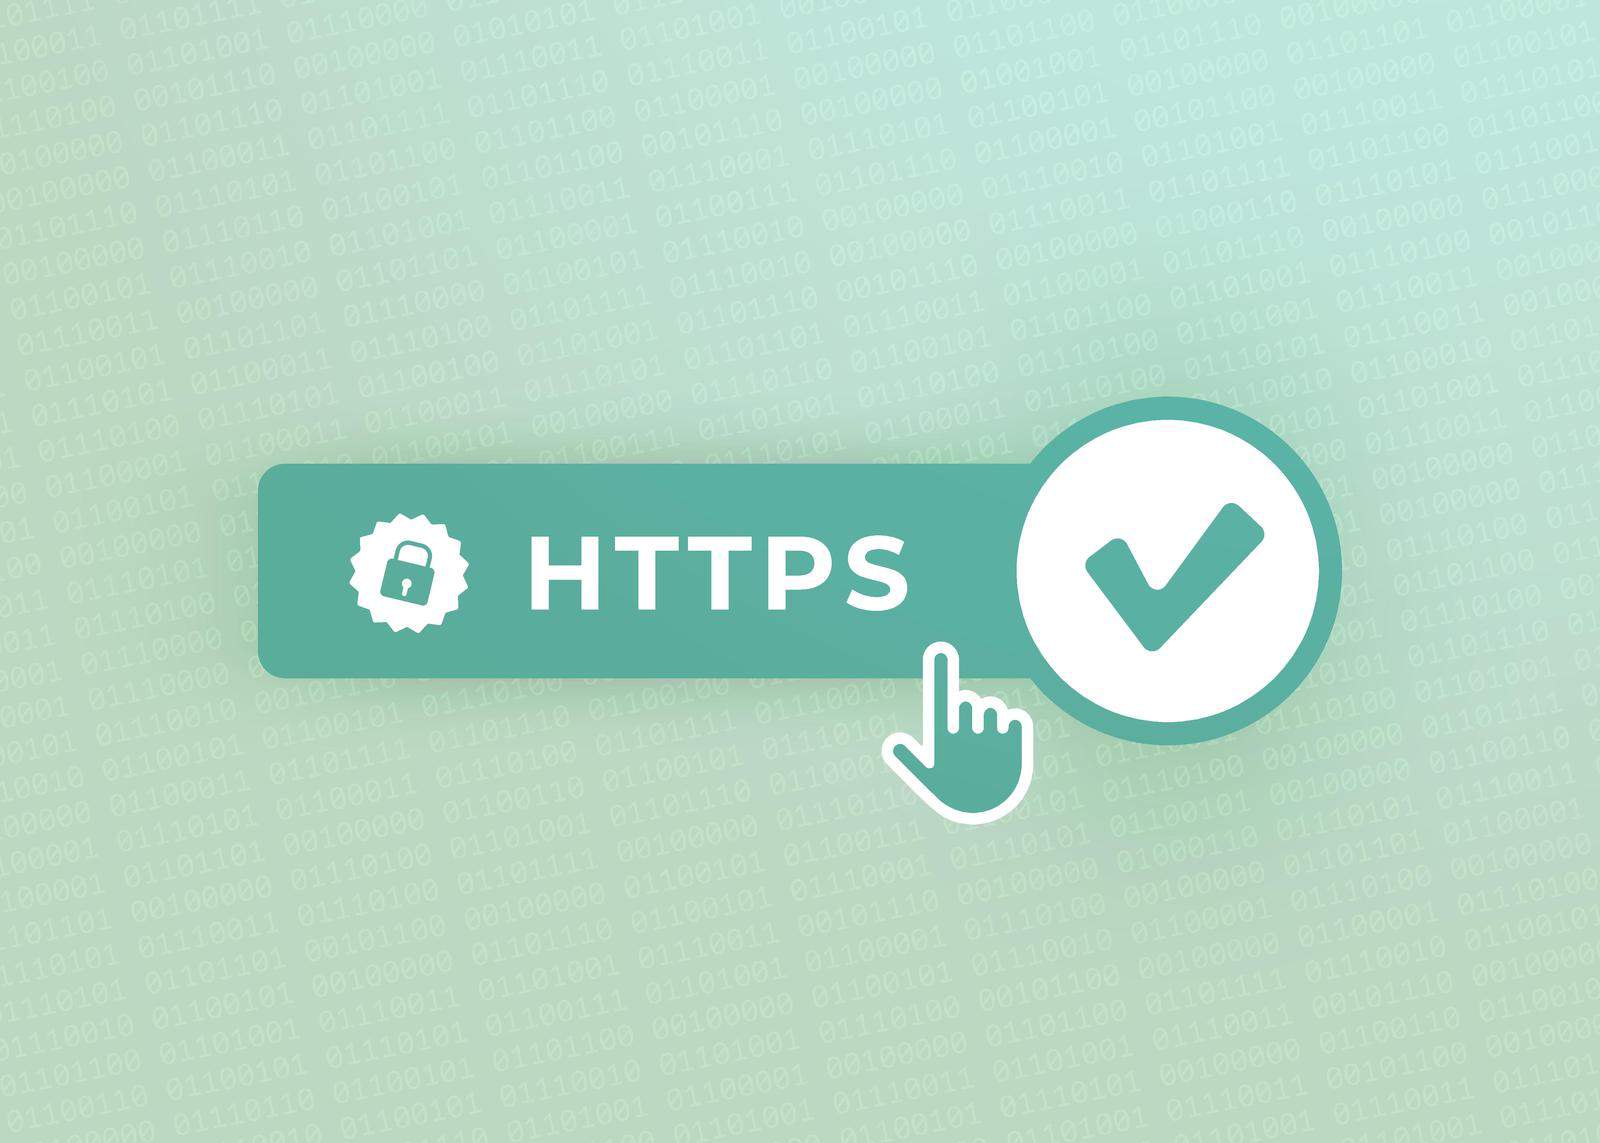 How To Install An Ssl Certificate